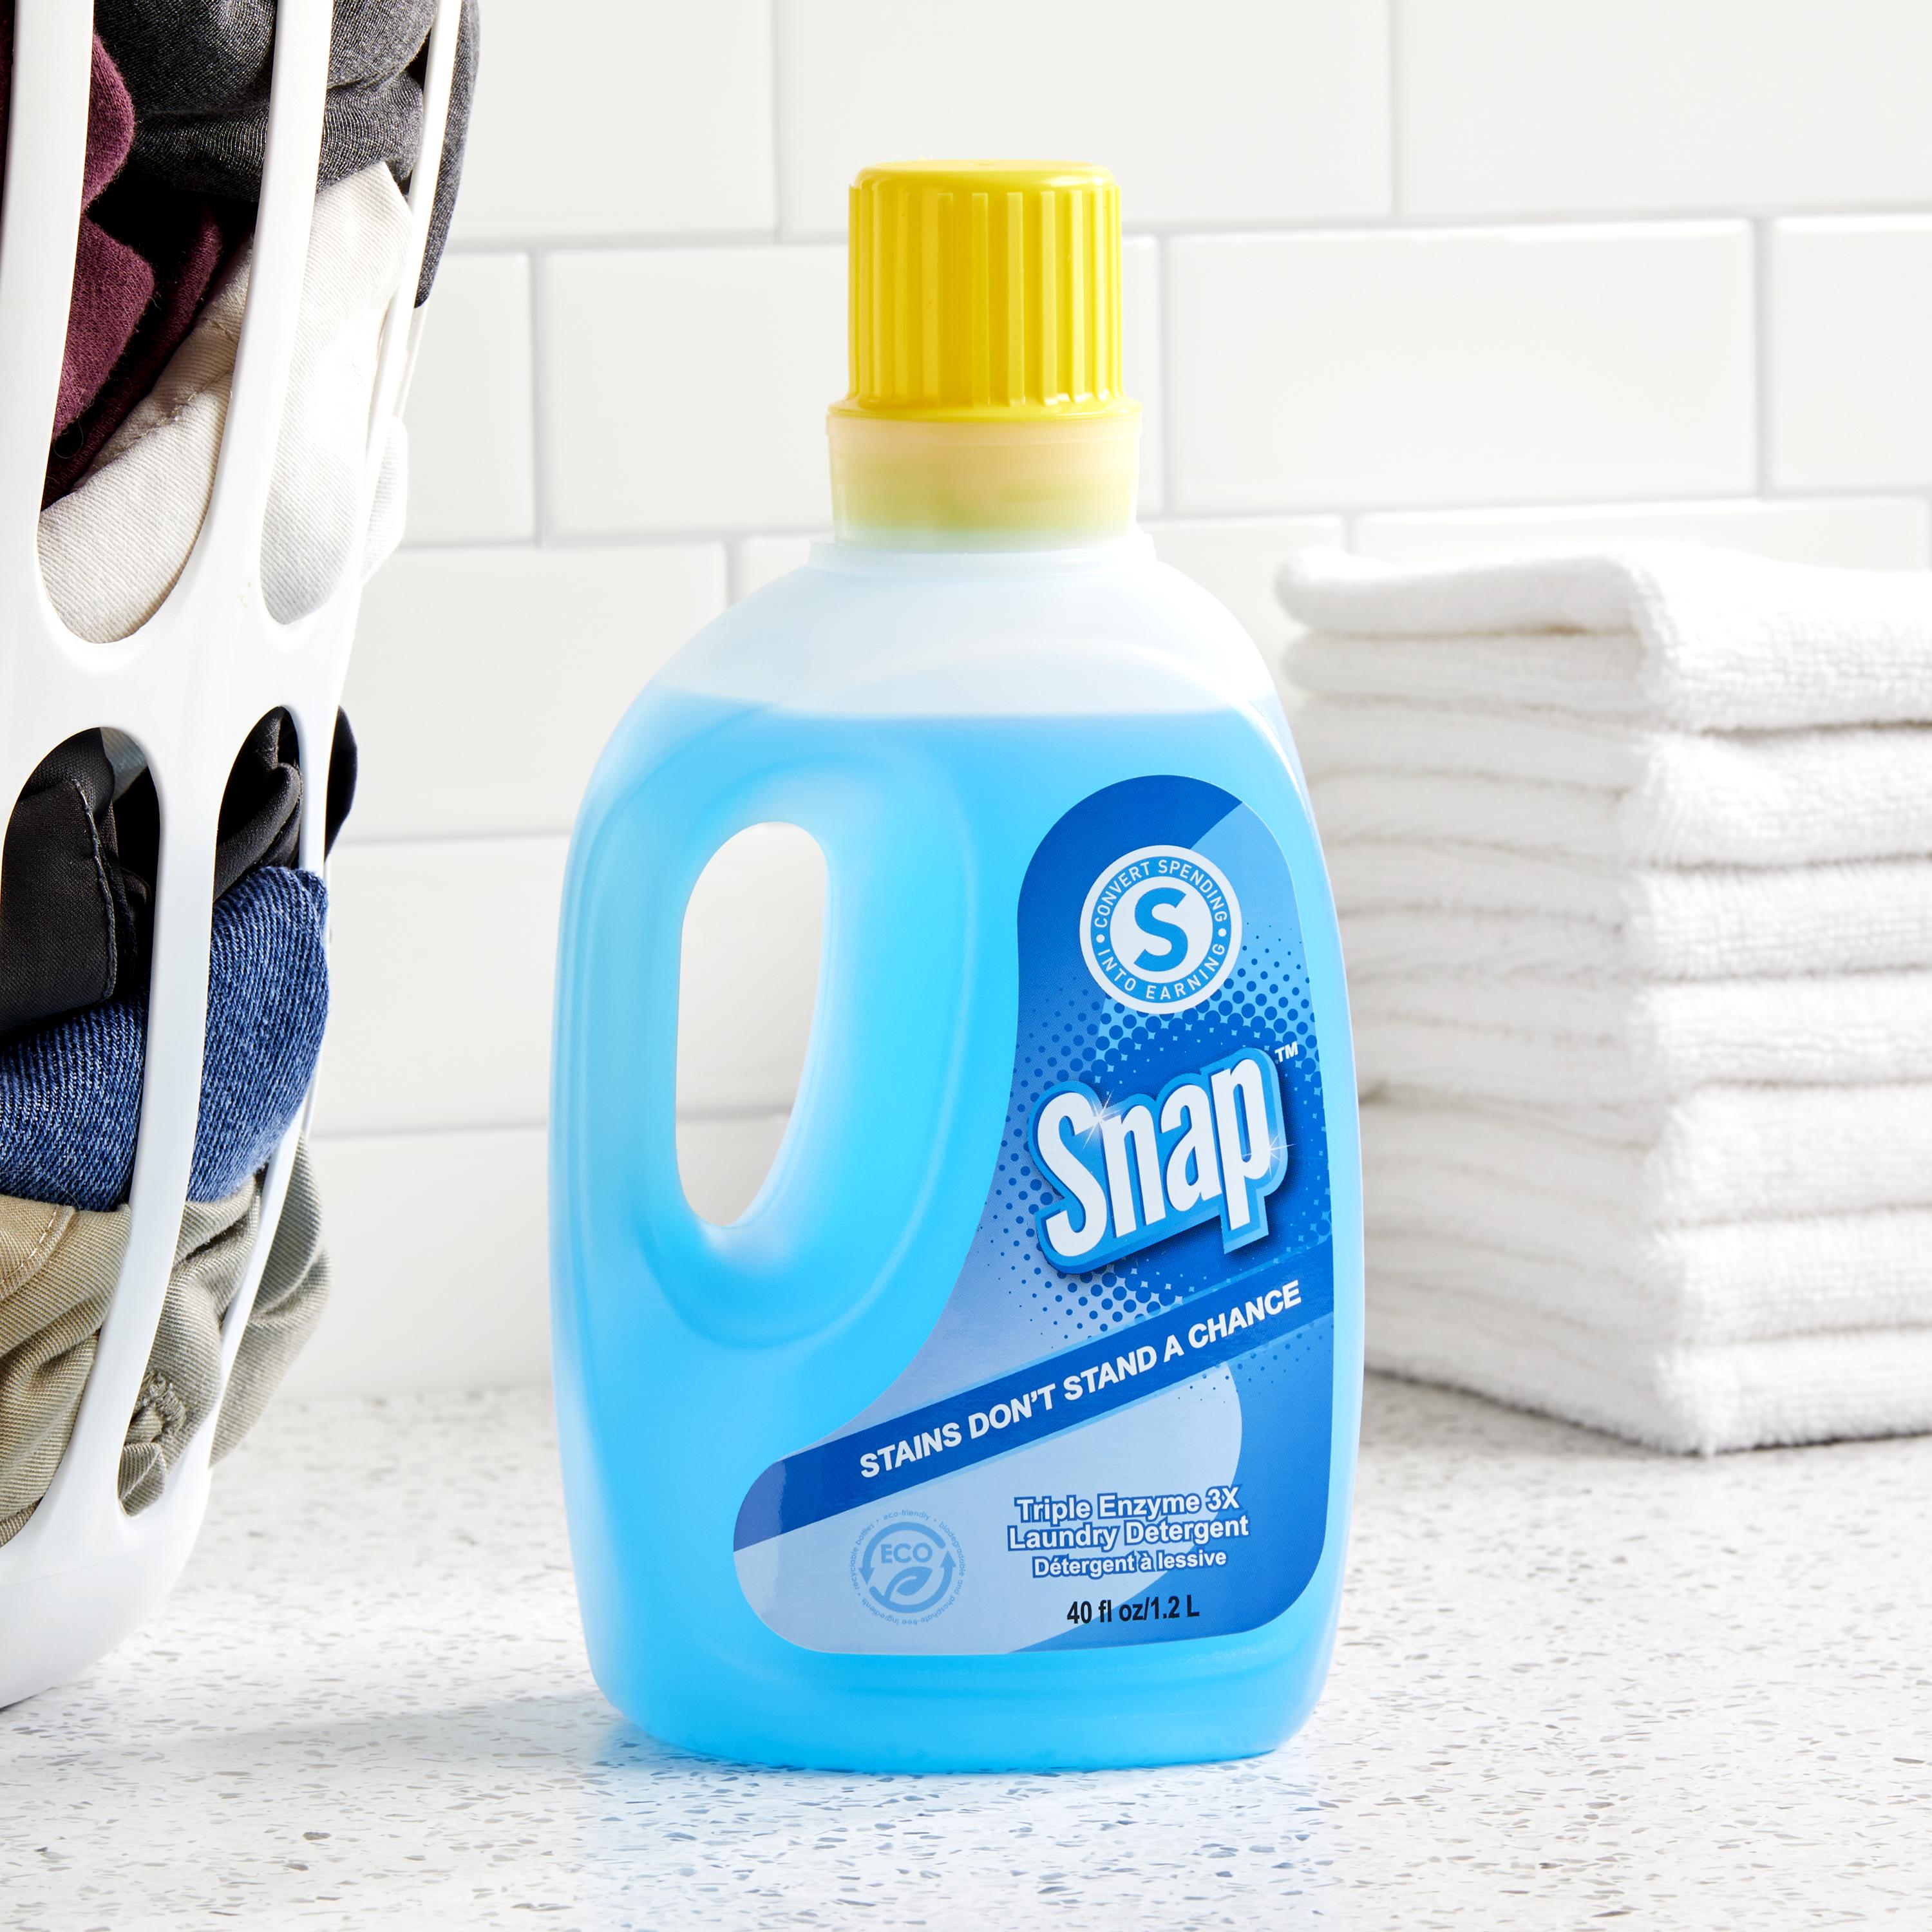 Shopping Annuity Brand SNAP&#174; Triple Enzyme 3X Laundry Detergent alternate image